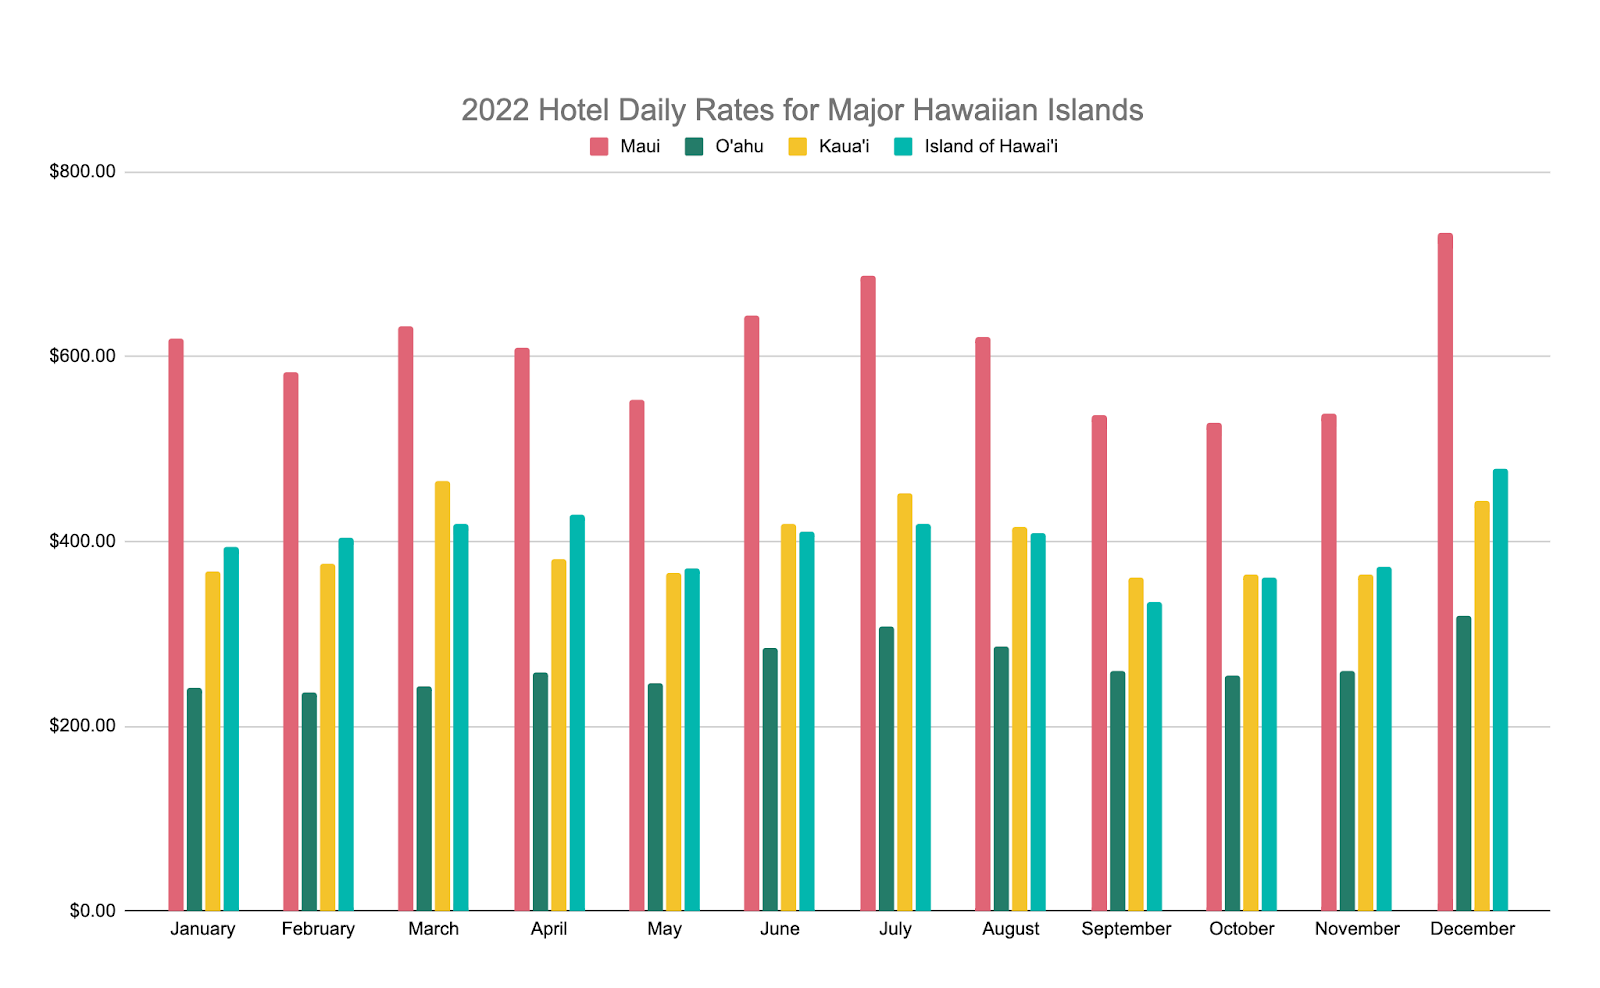 Hawaii in June - 2022 Hotel Daily Rates